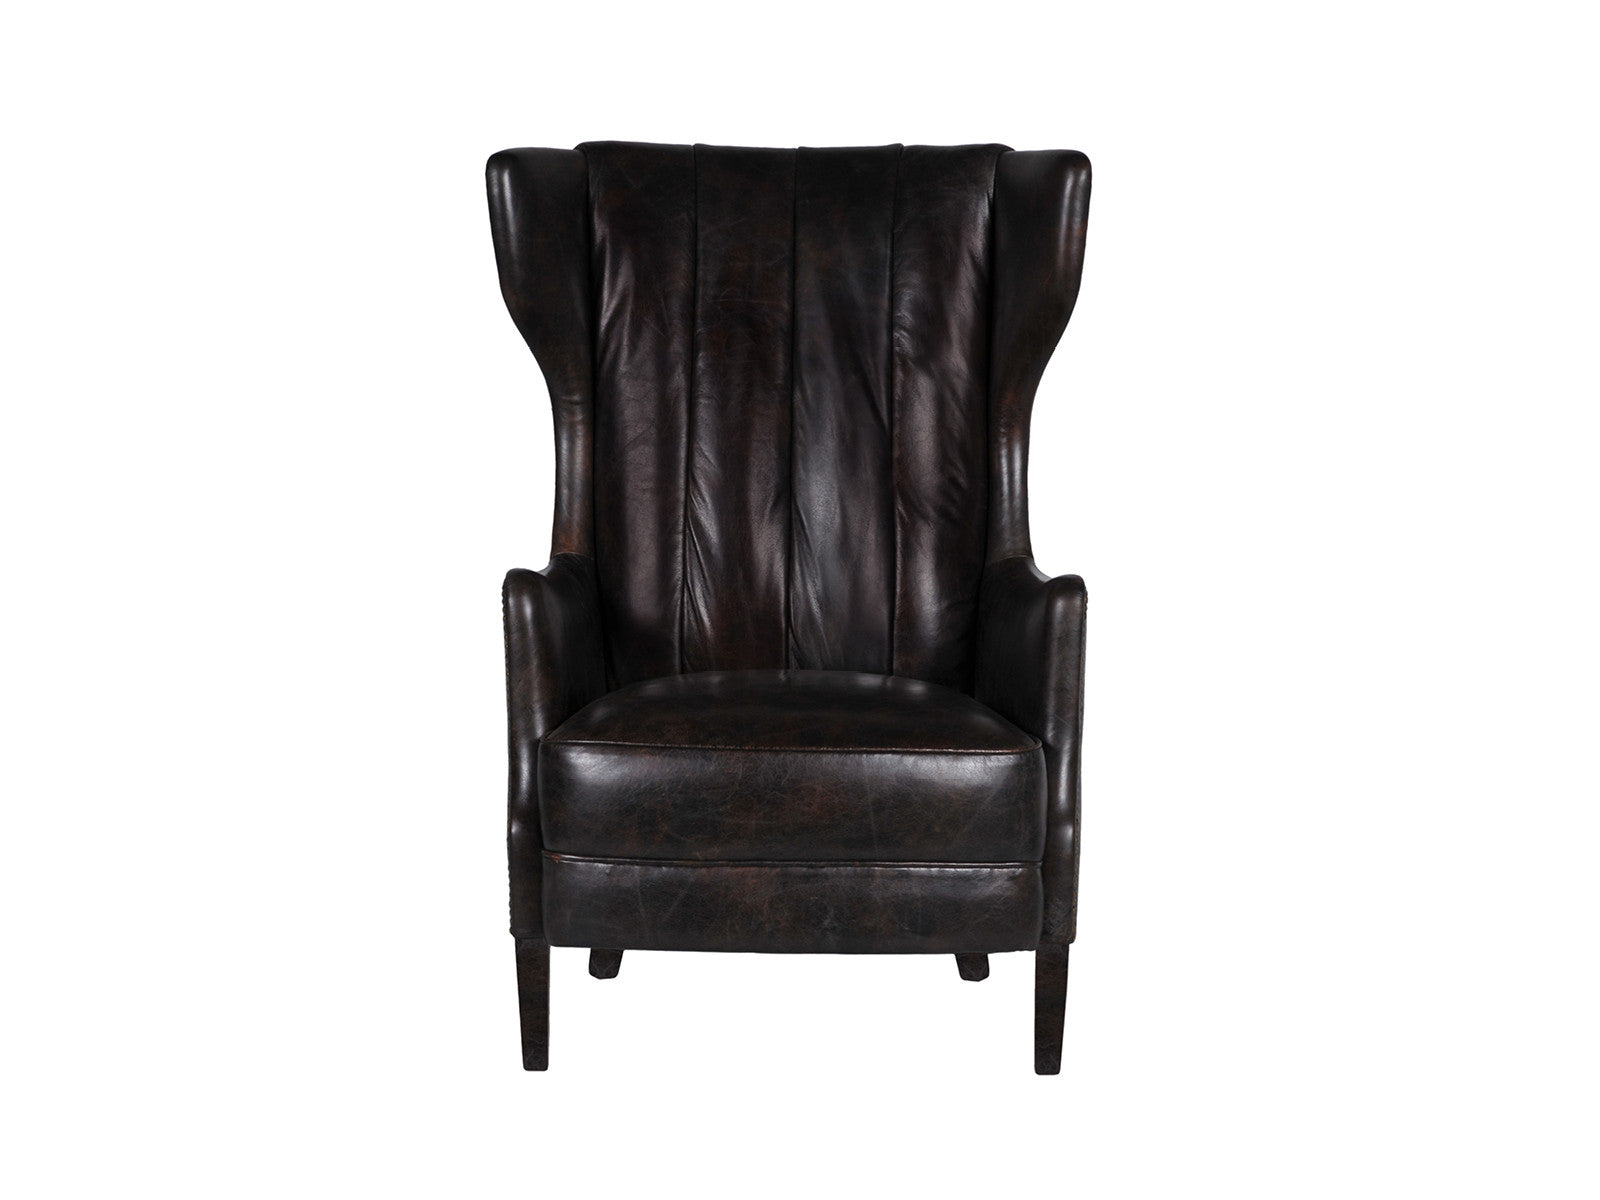 Manor_chair_TimothyOulton_DawsonandCo_Front_2